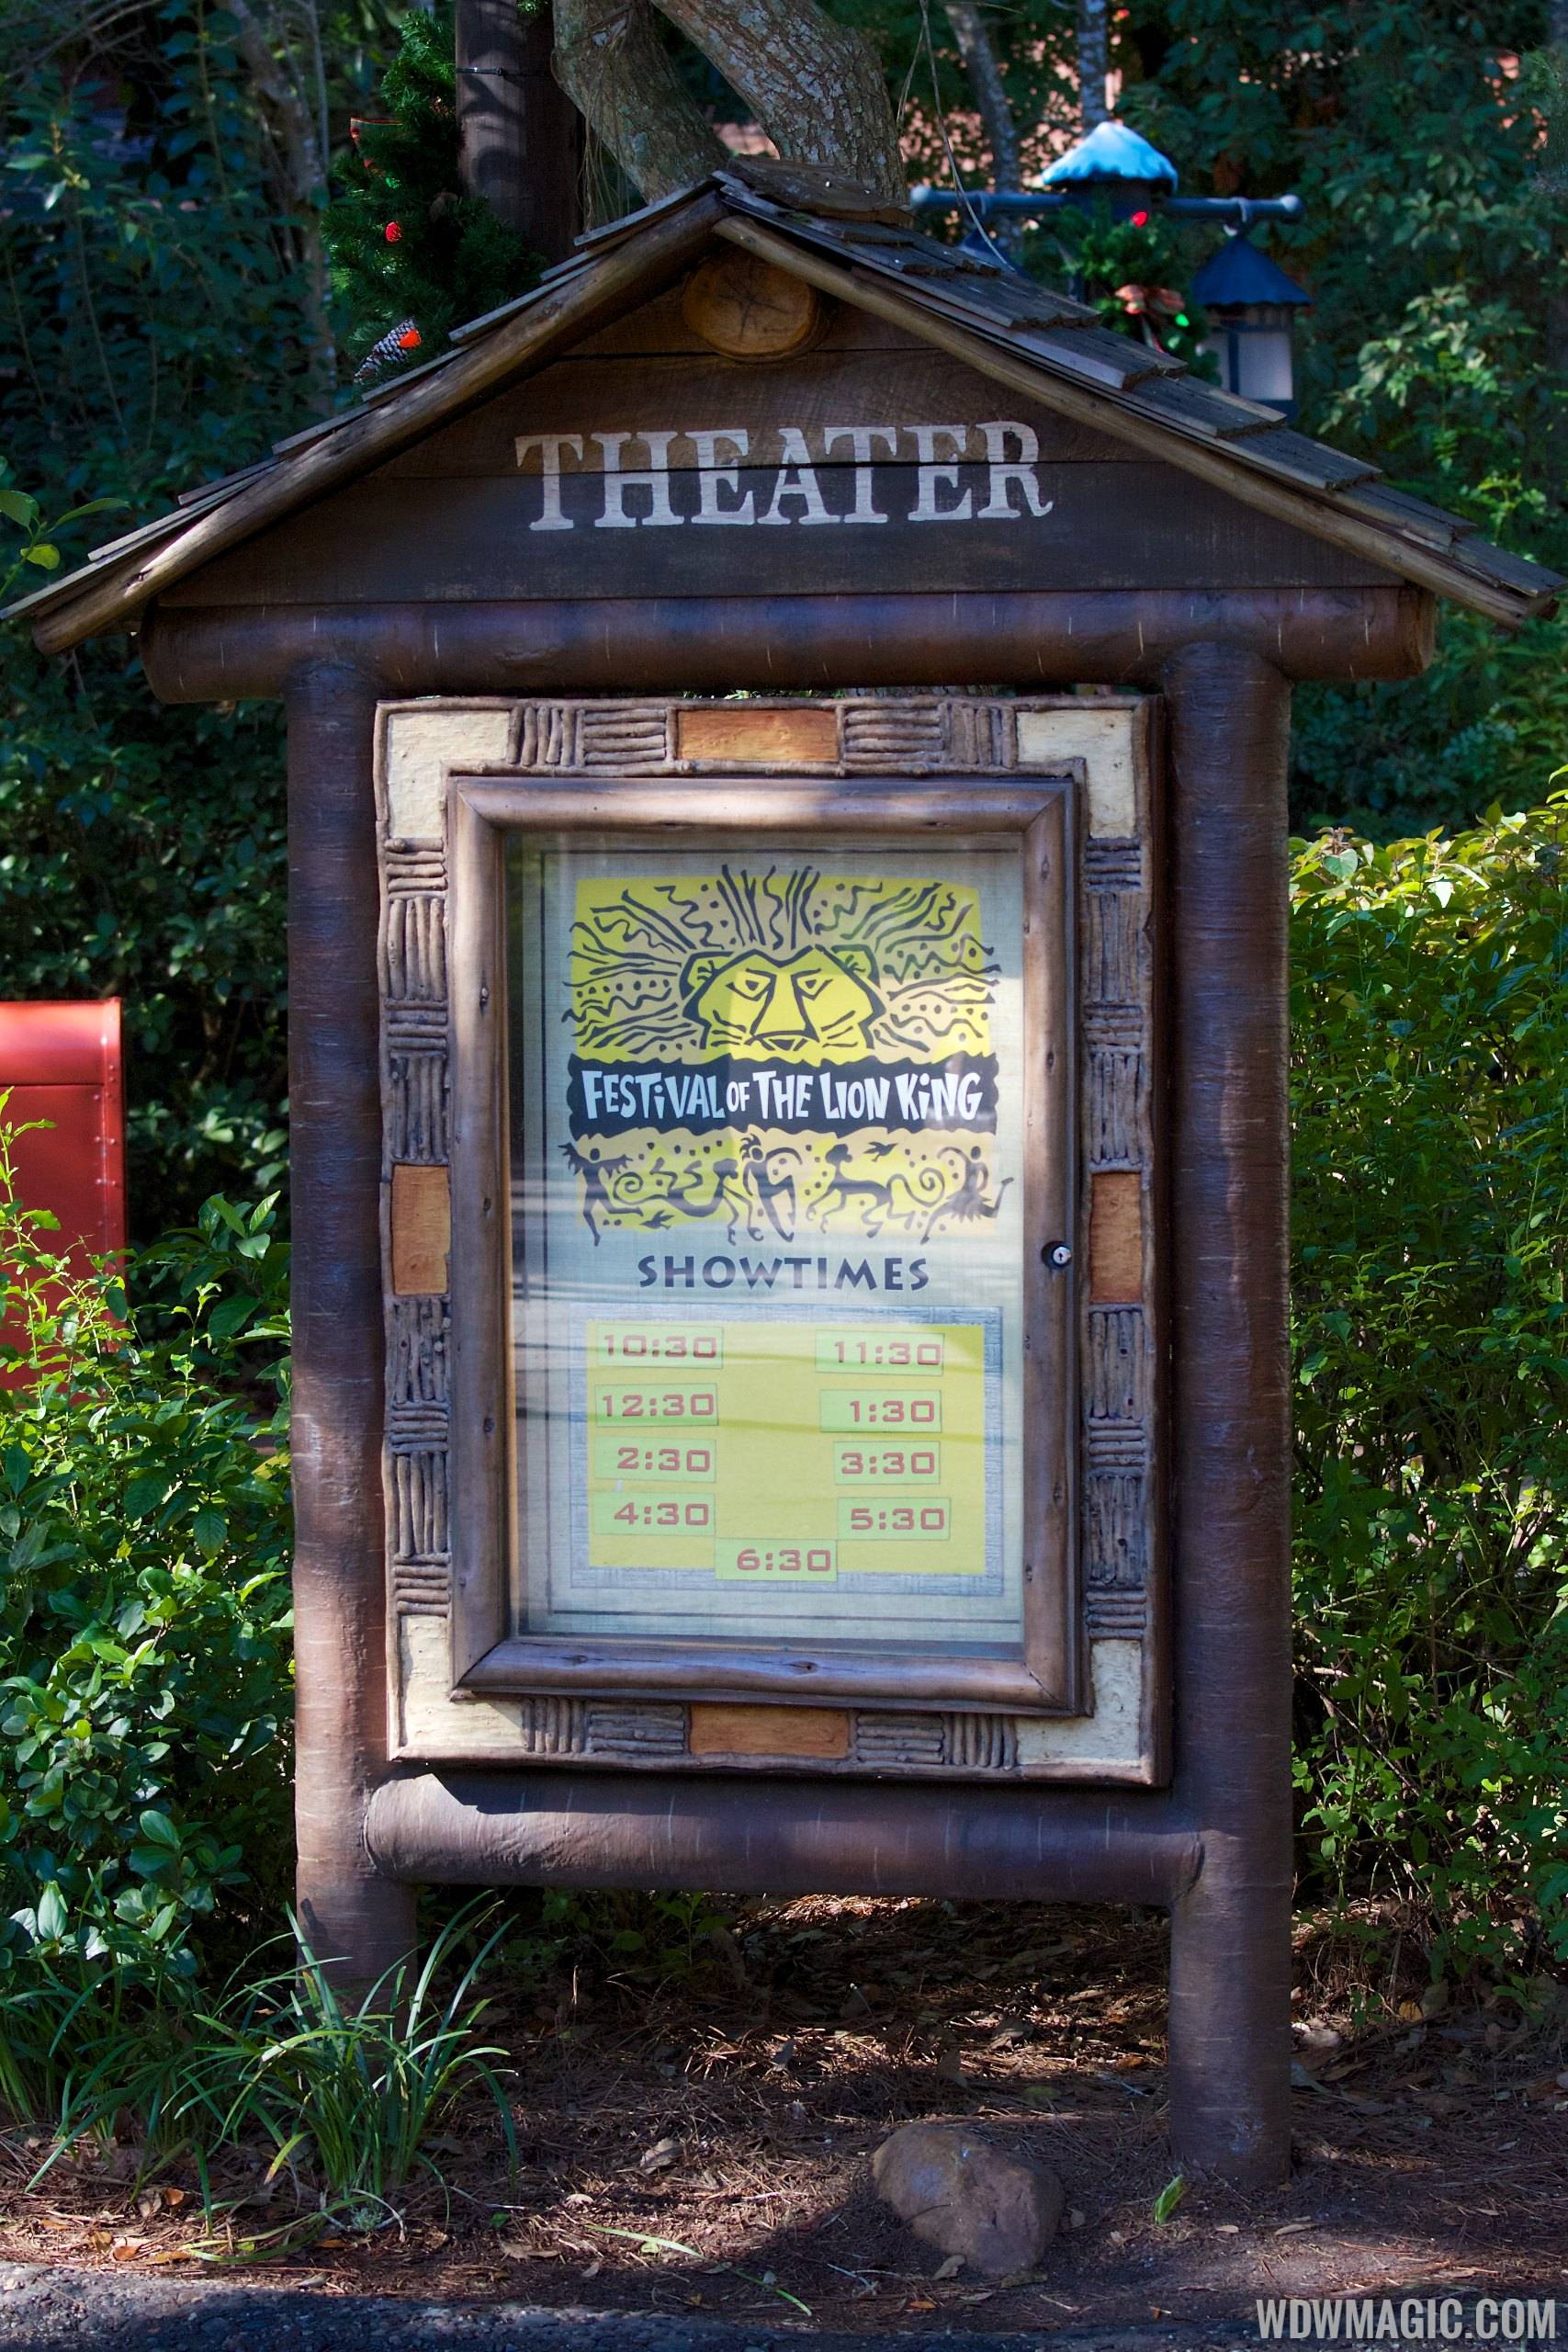 Camp Minnie-Mickey - Festival of the Lion King showtime board